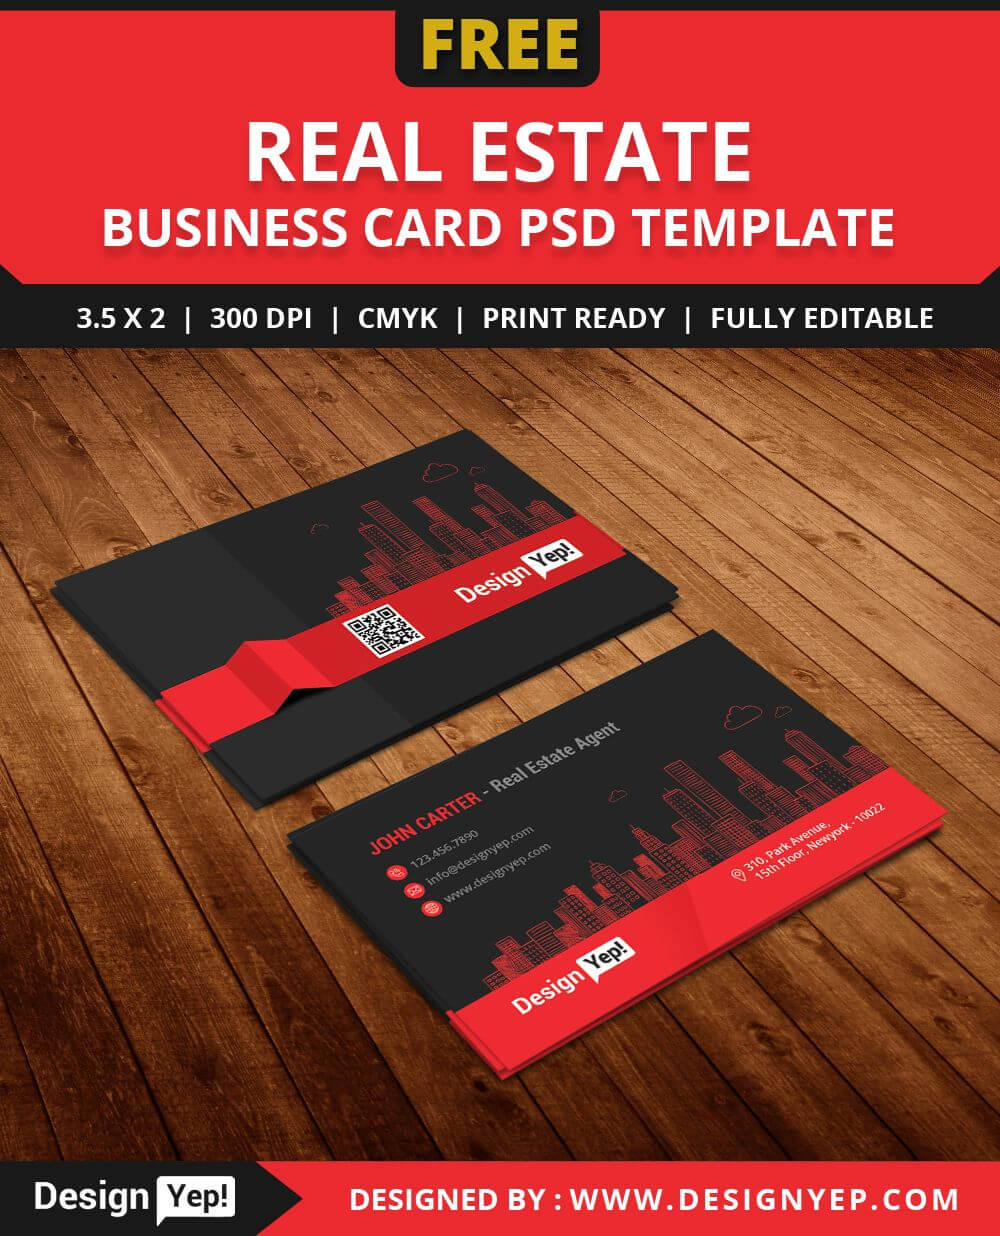 Free Real Estate Agent Business Card Template Psd | Free Inside Real Estate Agent Business Card Template